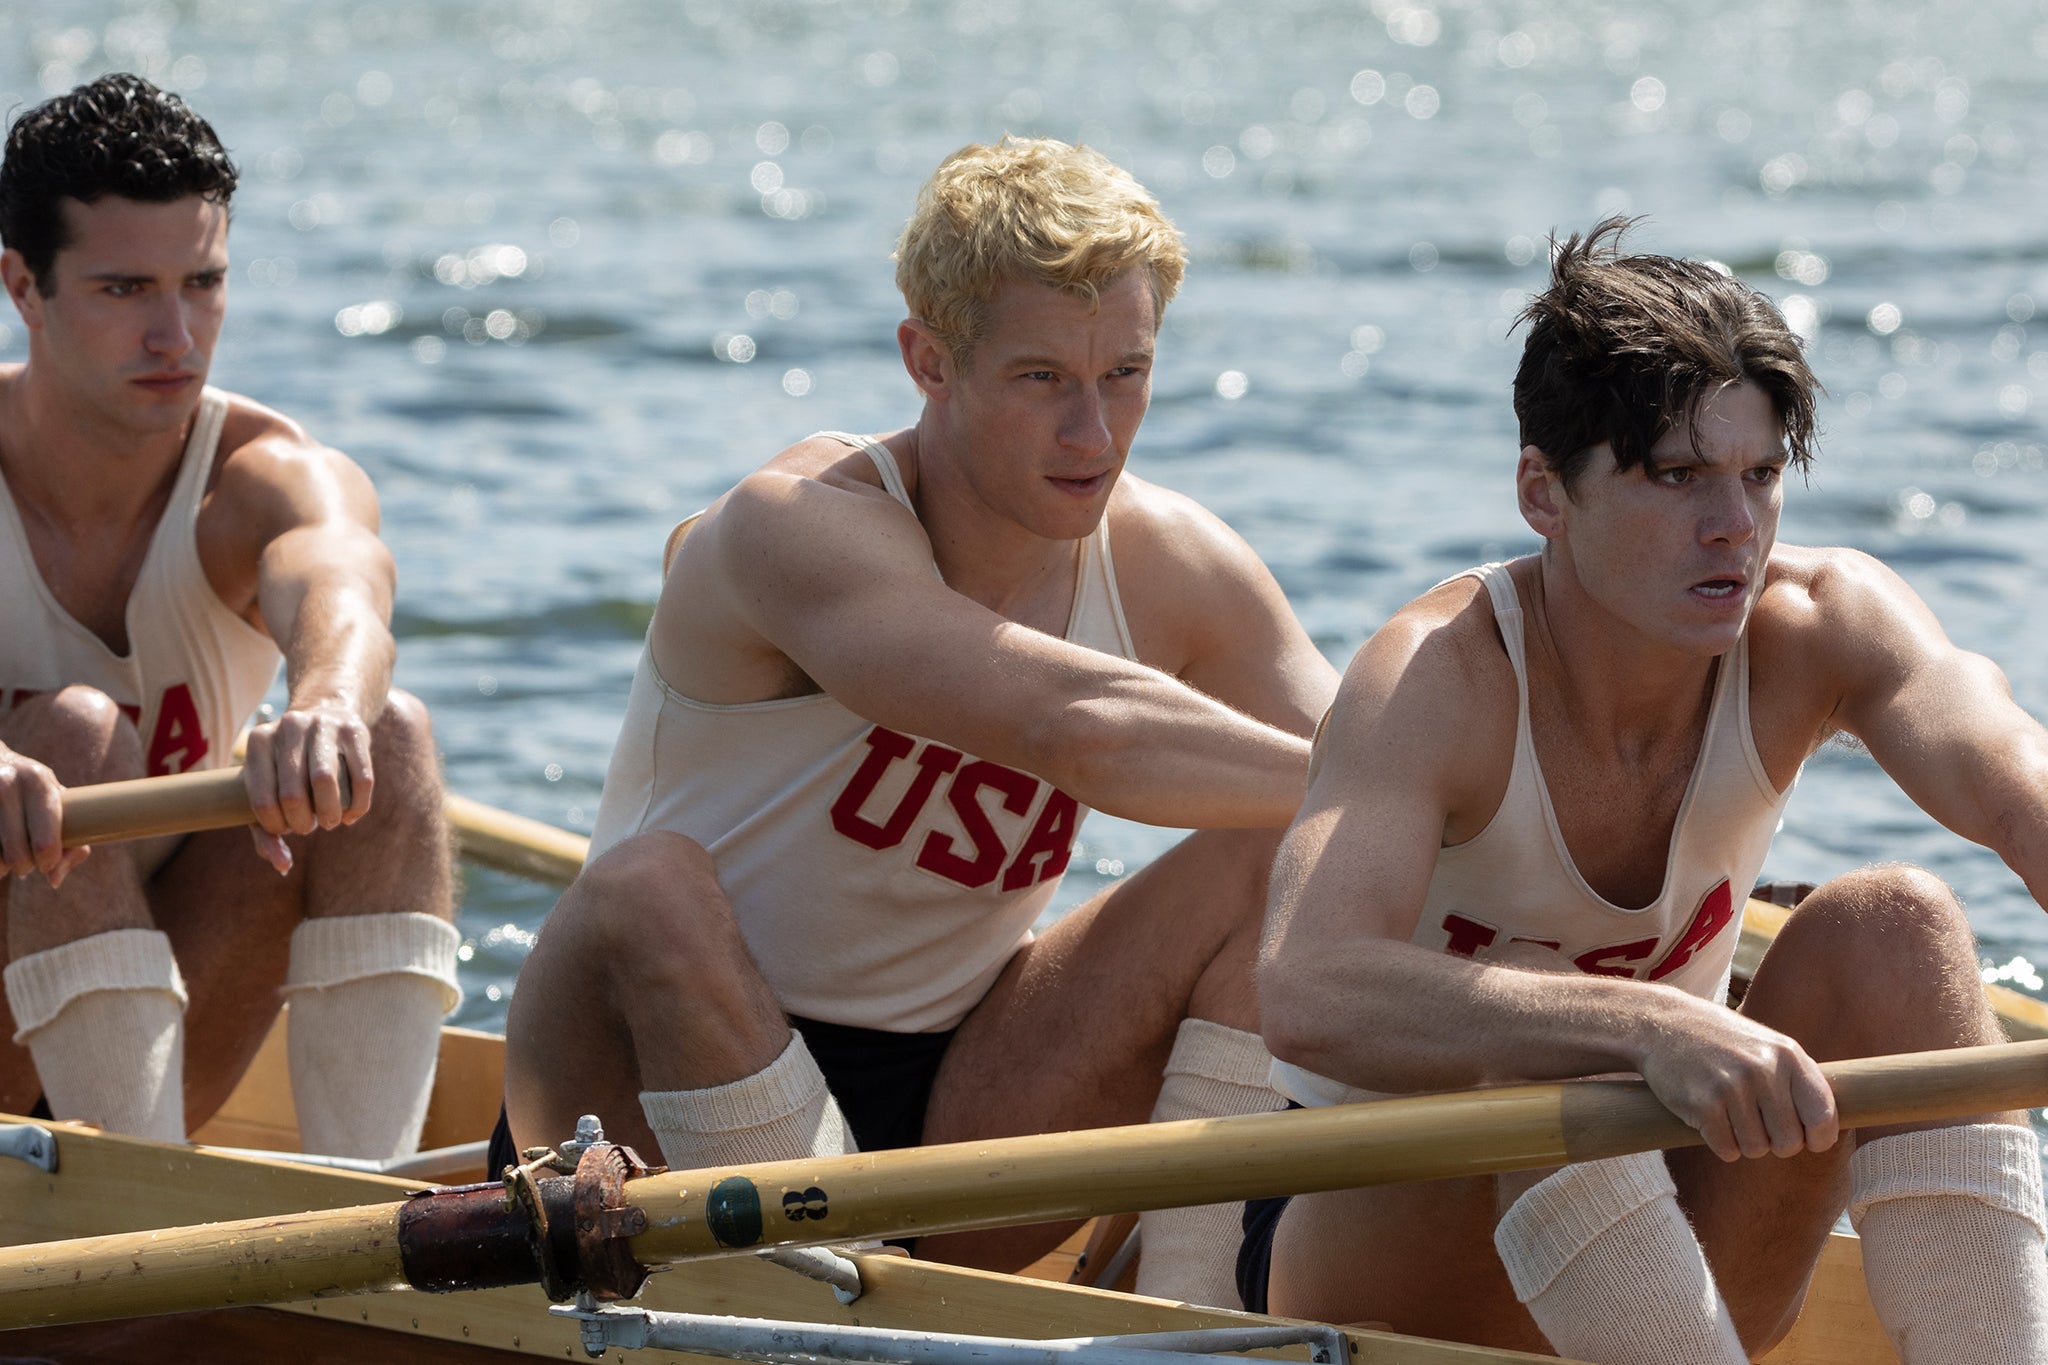 An almighty row: Bruce Herbelin-Earle, Callum Turner and Jack Mulhern’s new film ‘The Boys in the Boat’ has divided critics